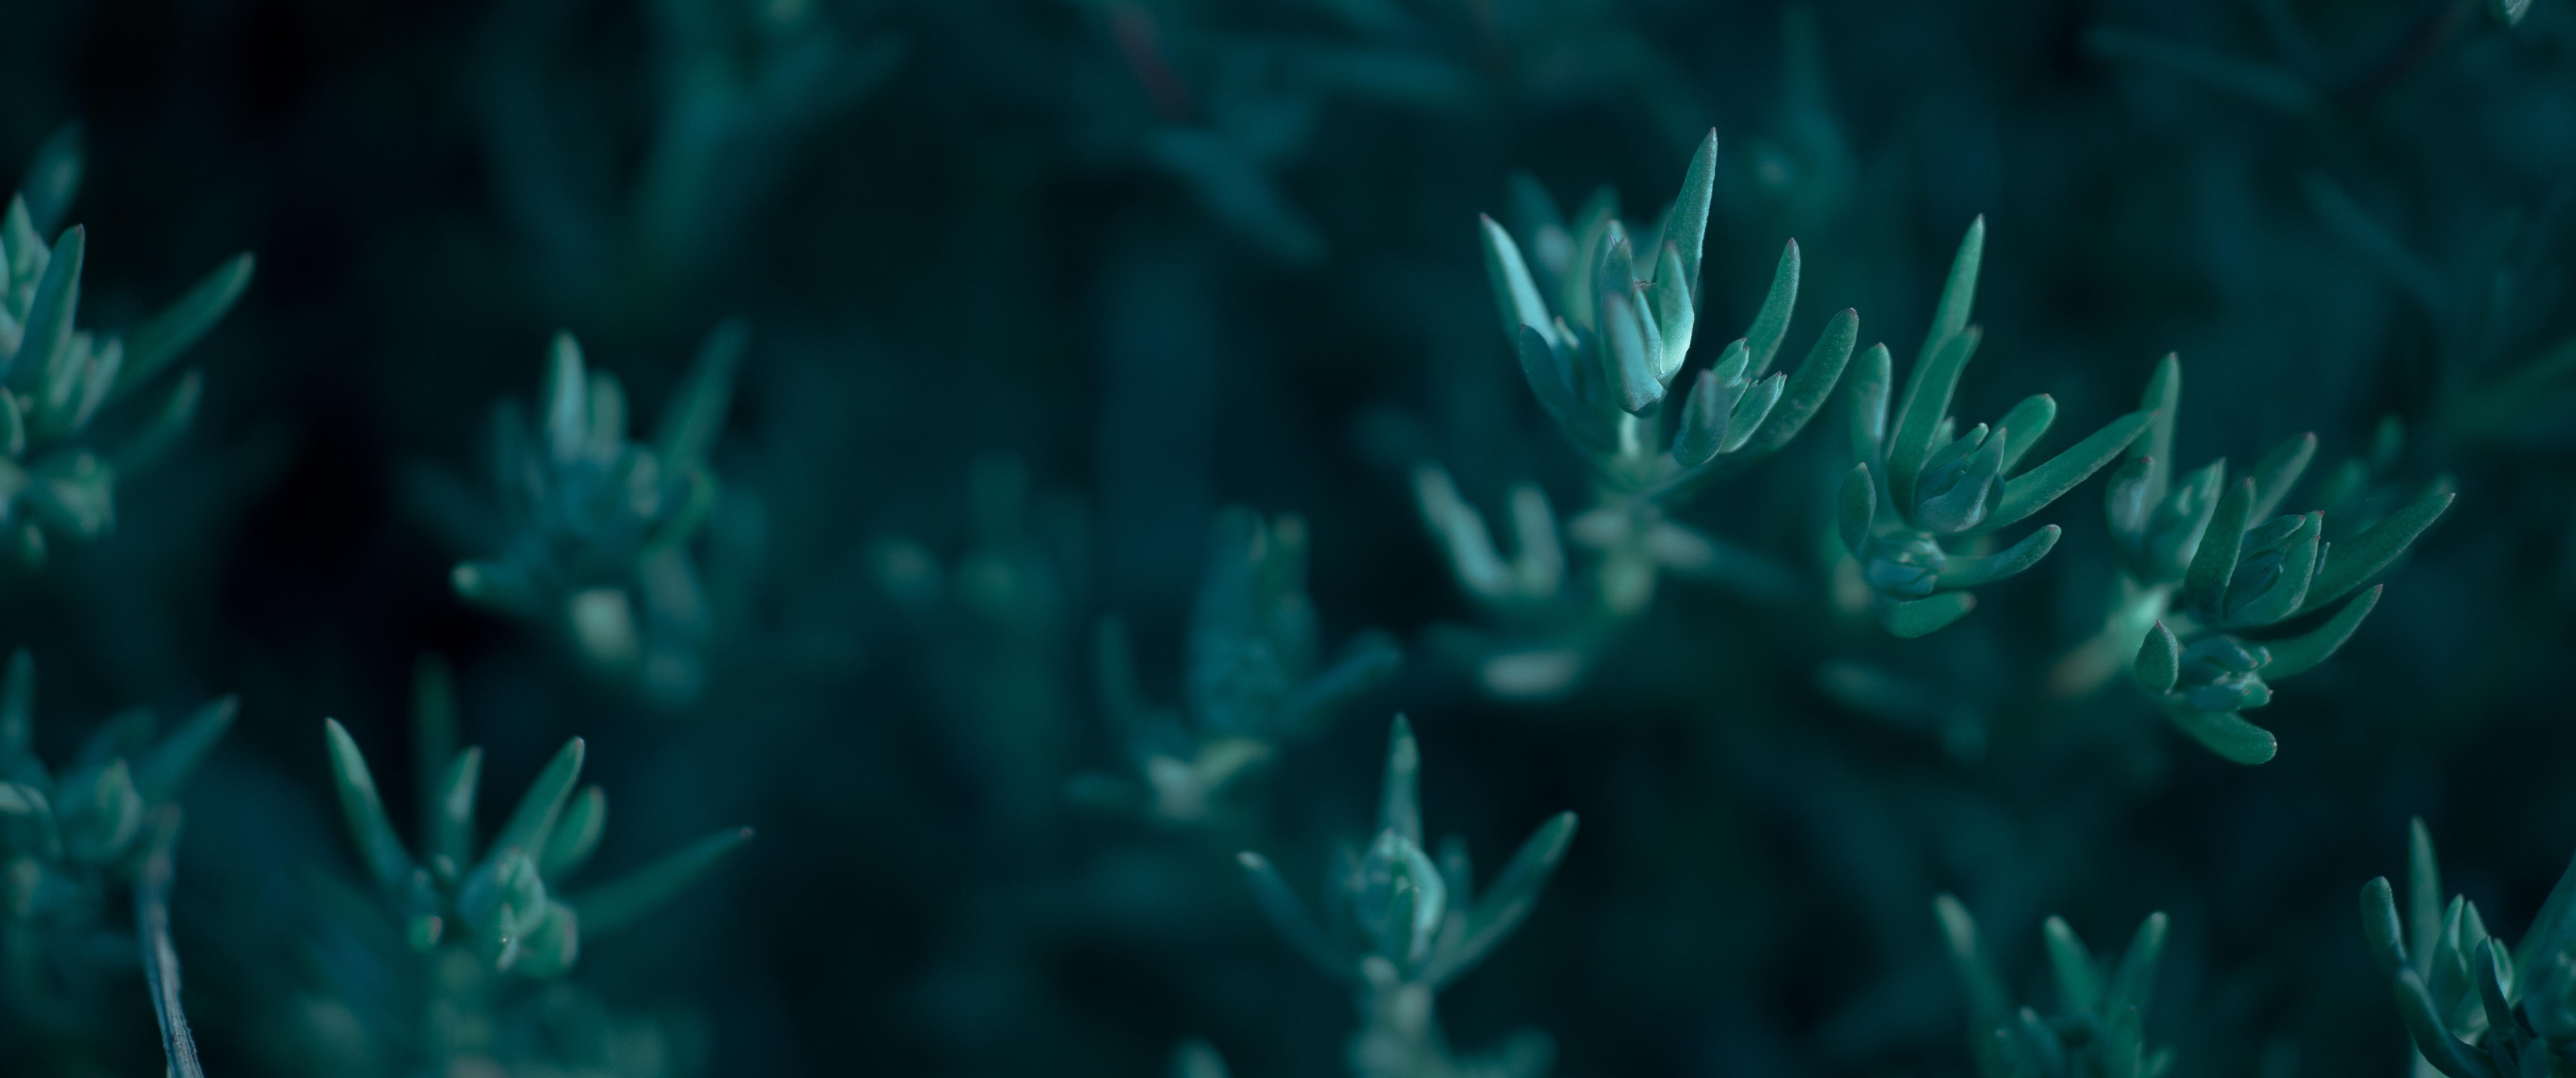 Photography Ultrawide Ultra Wide Plants Succulent 3440x1440